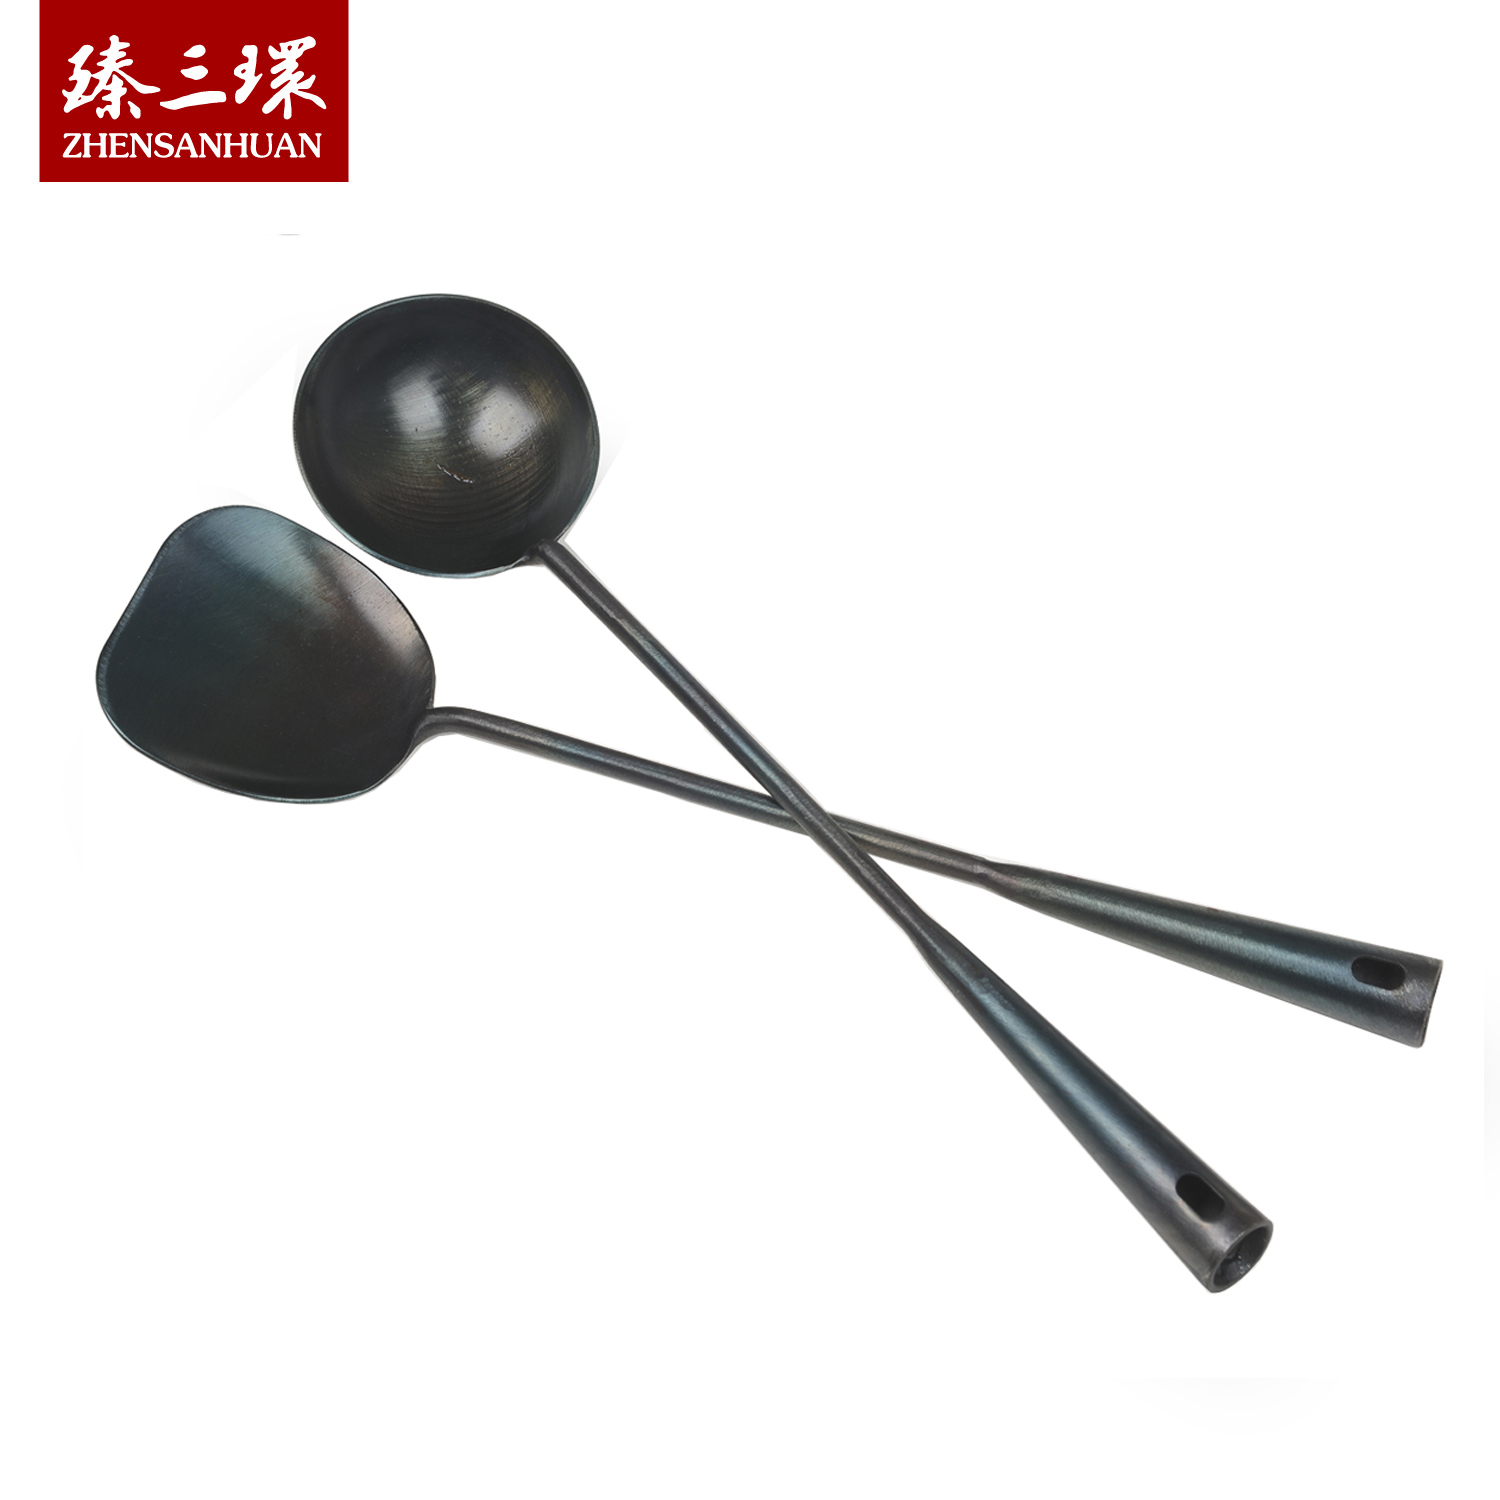 Learn about basic Chinese cooking equipment - wok, ladle 